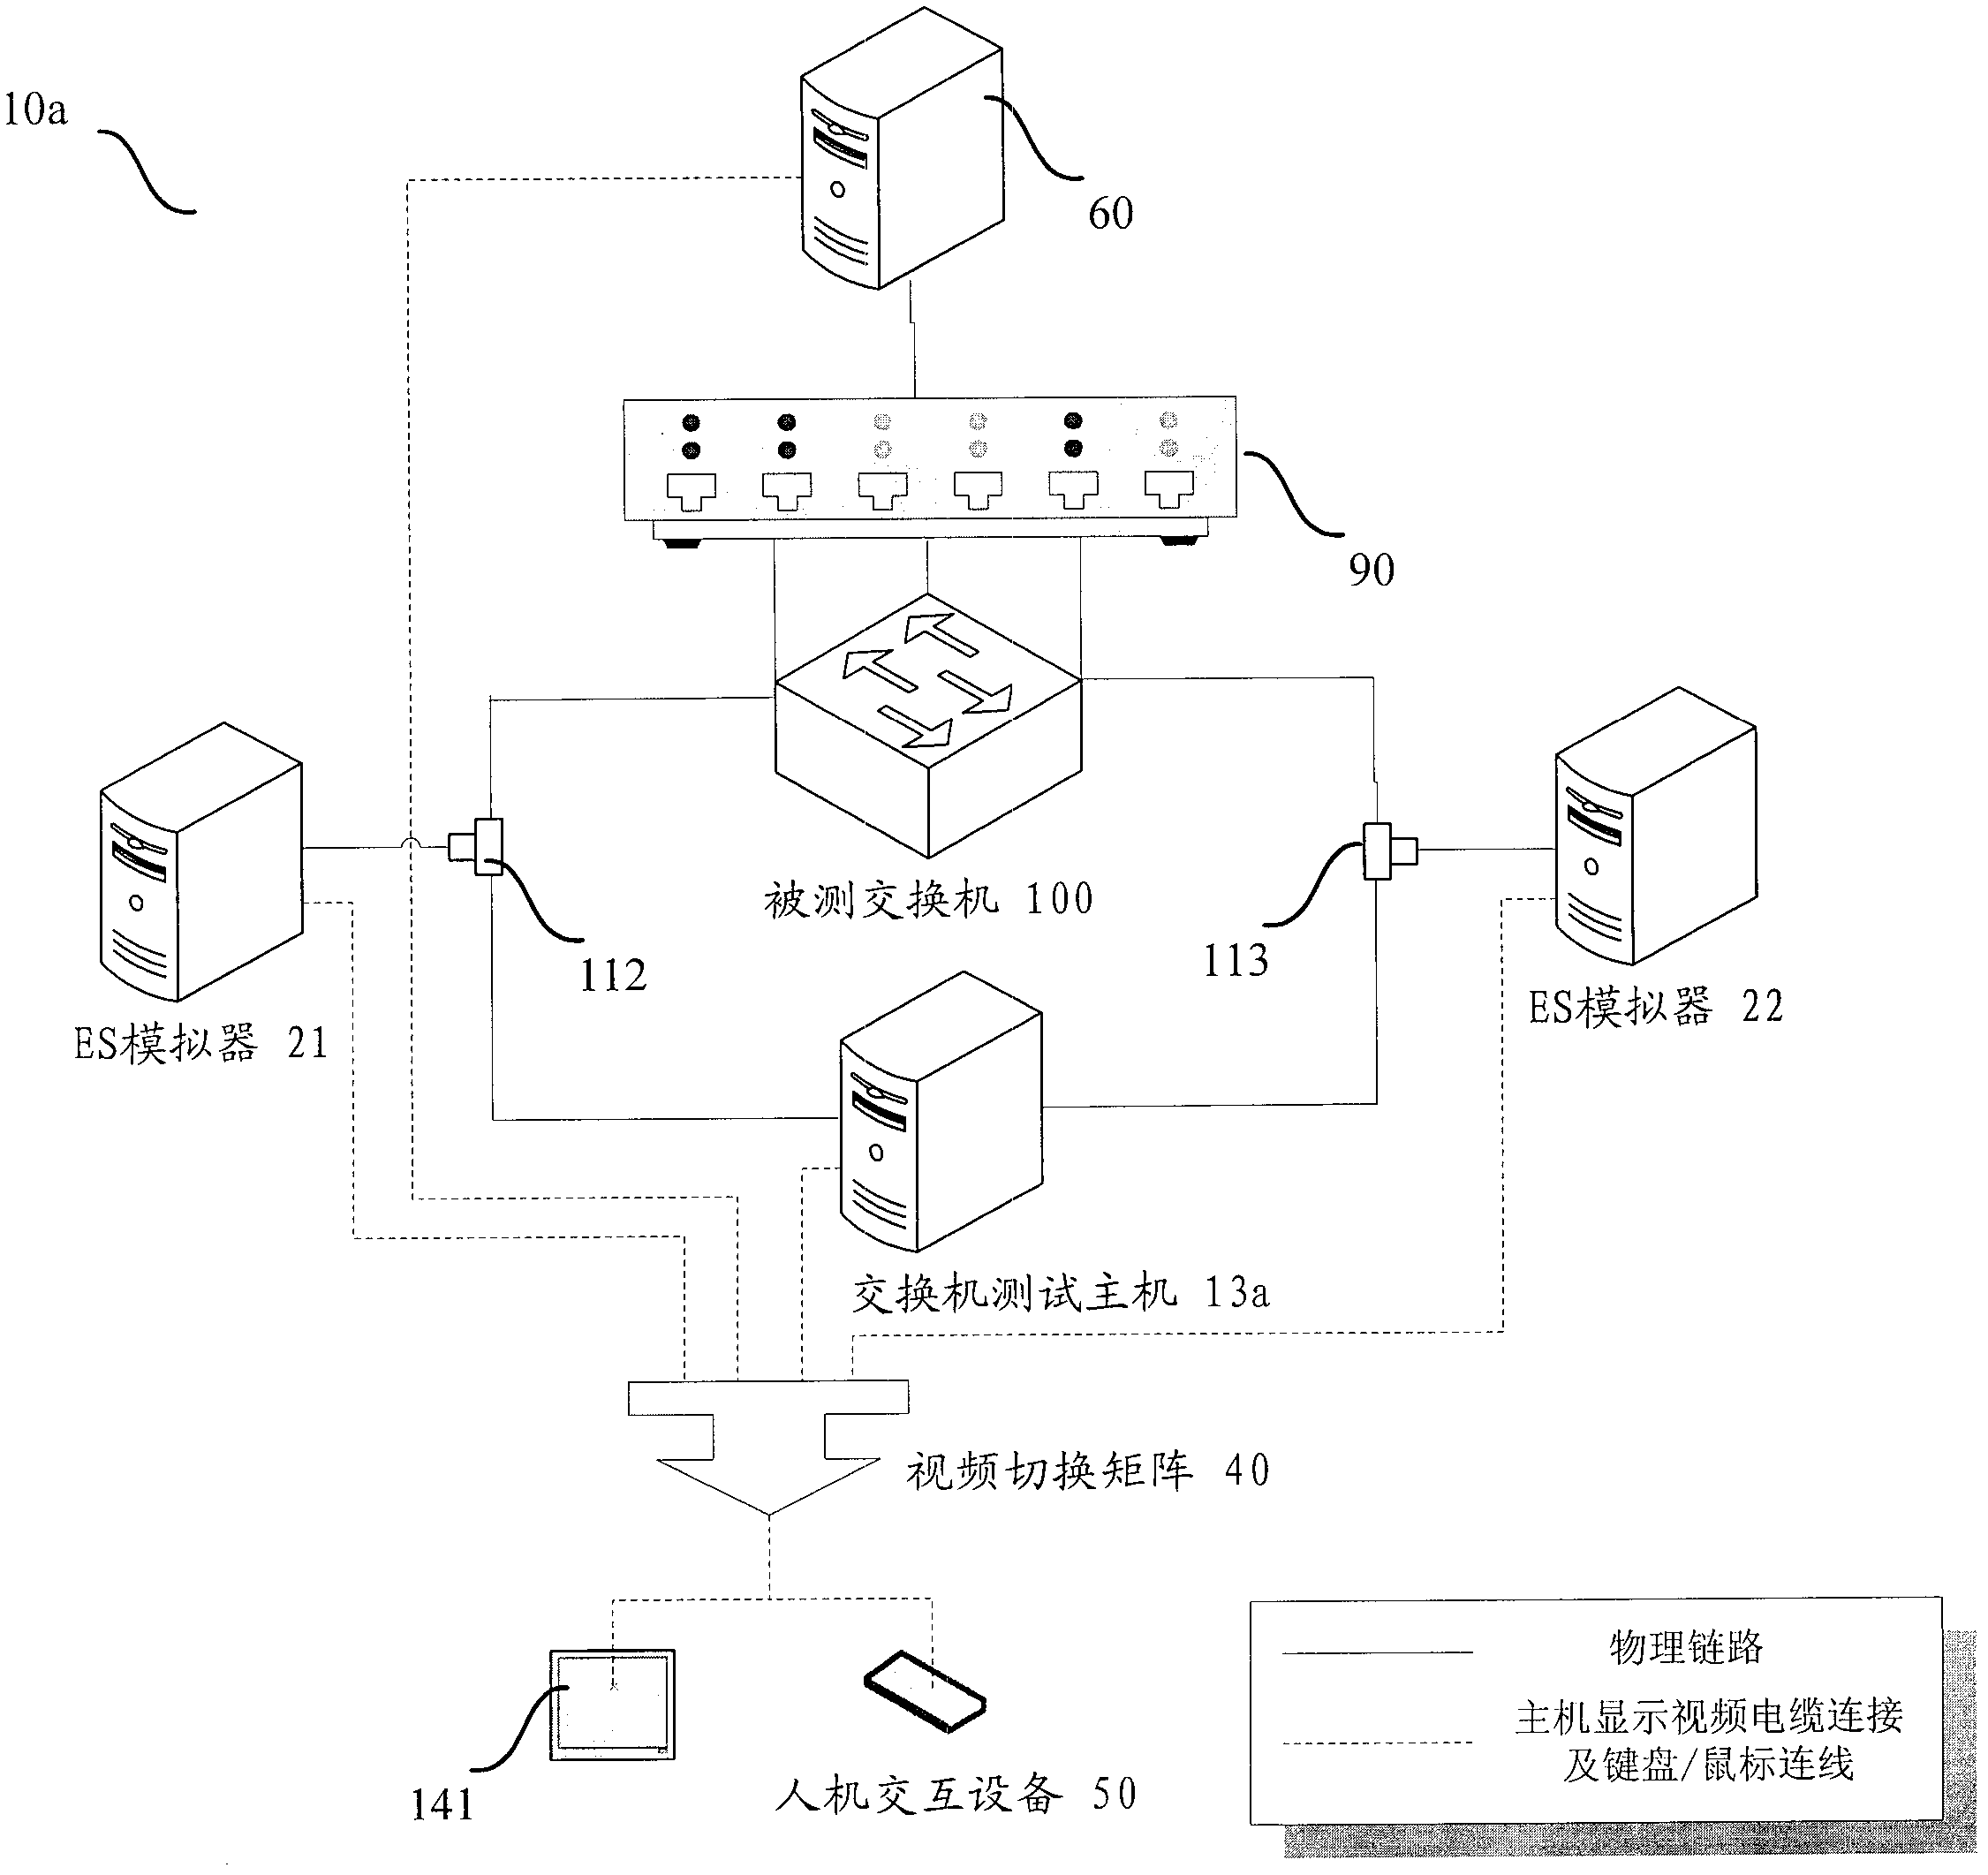 Network testing device